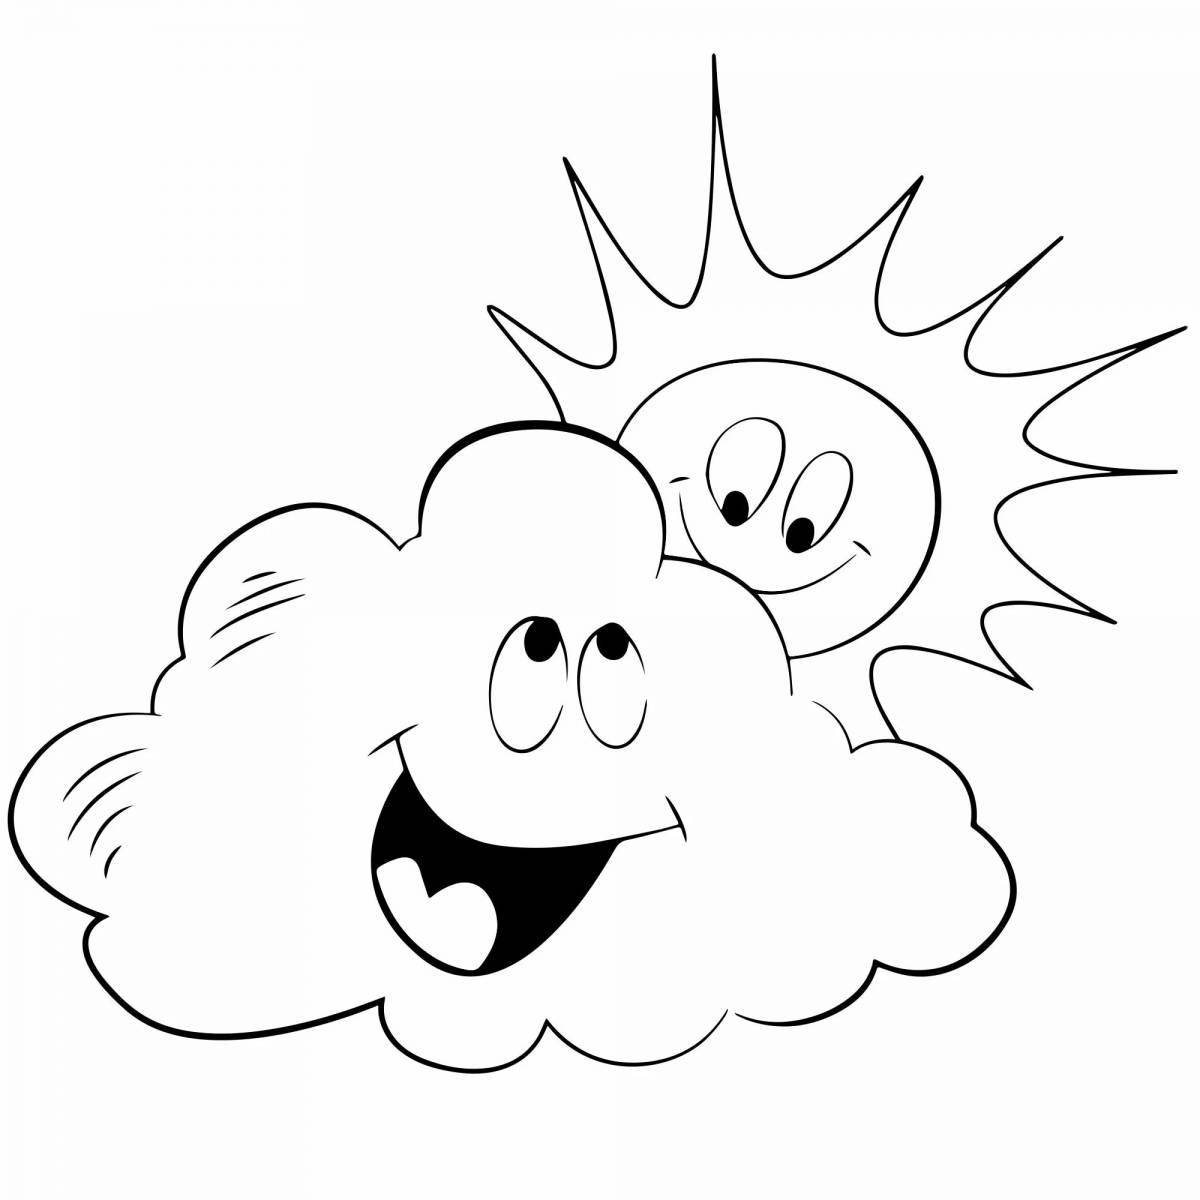 Coloring dreamy cloud for kids